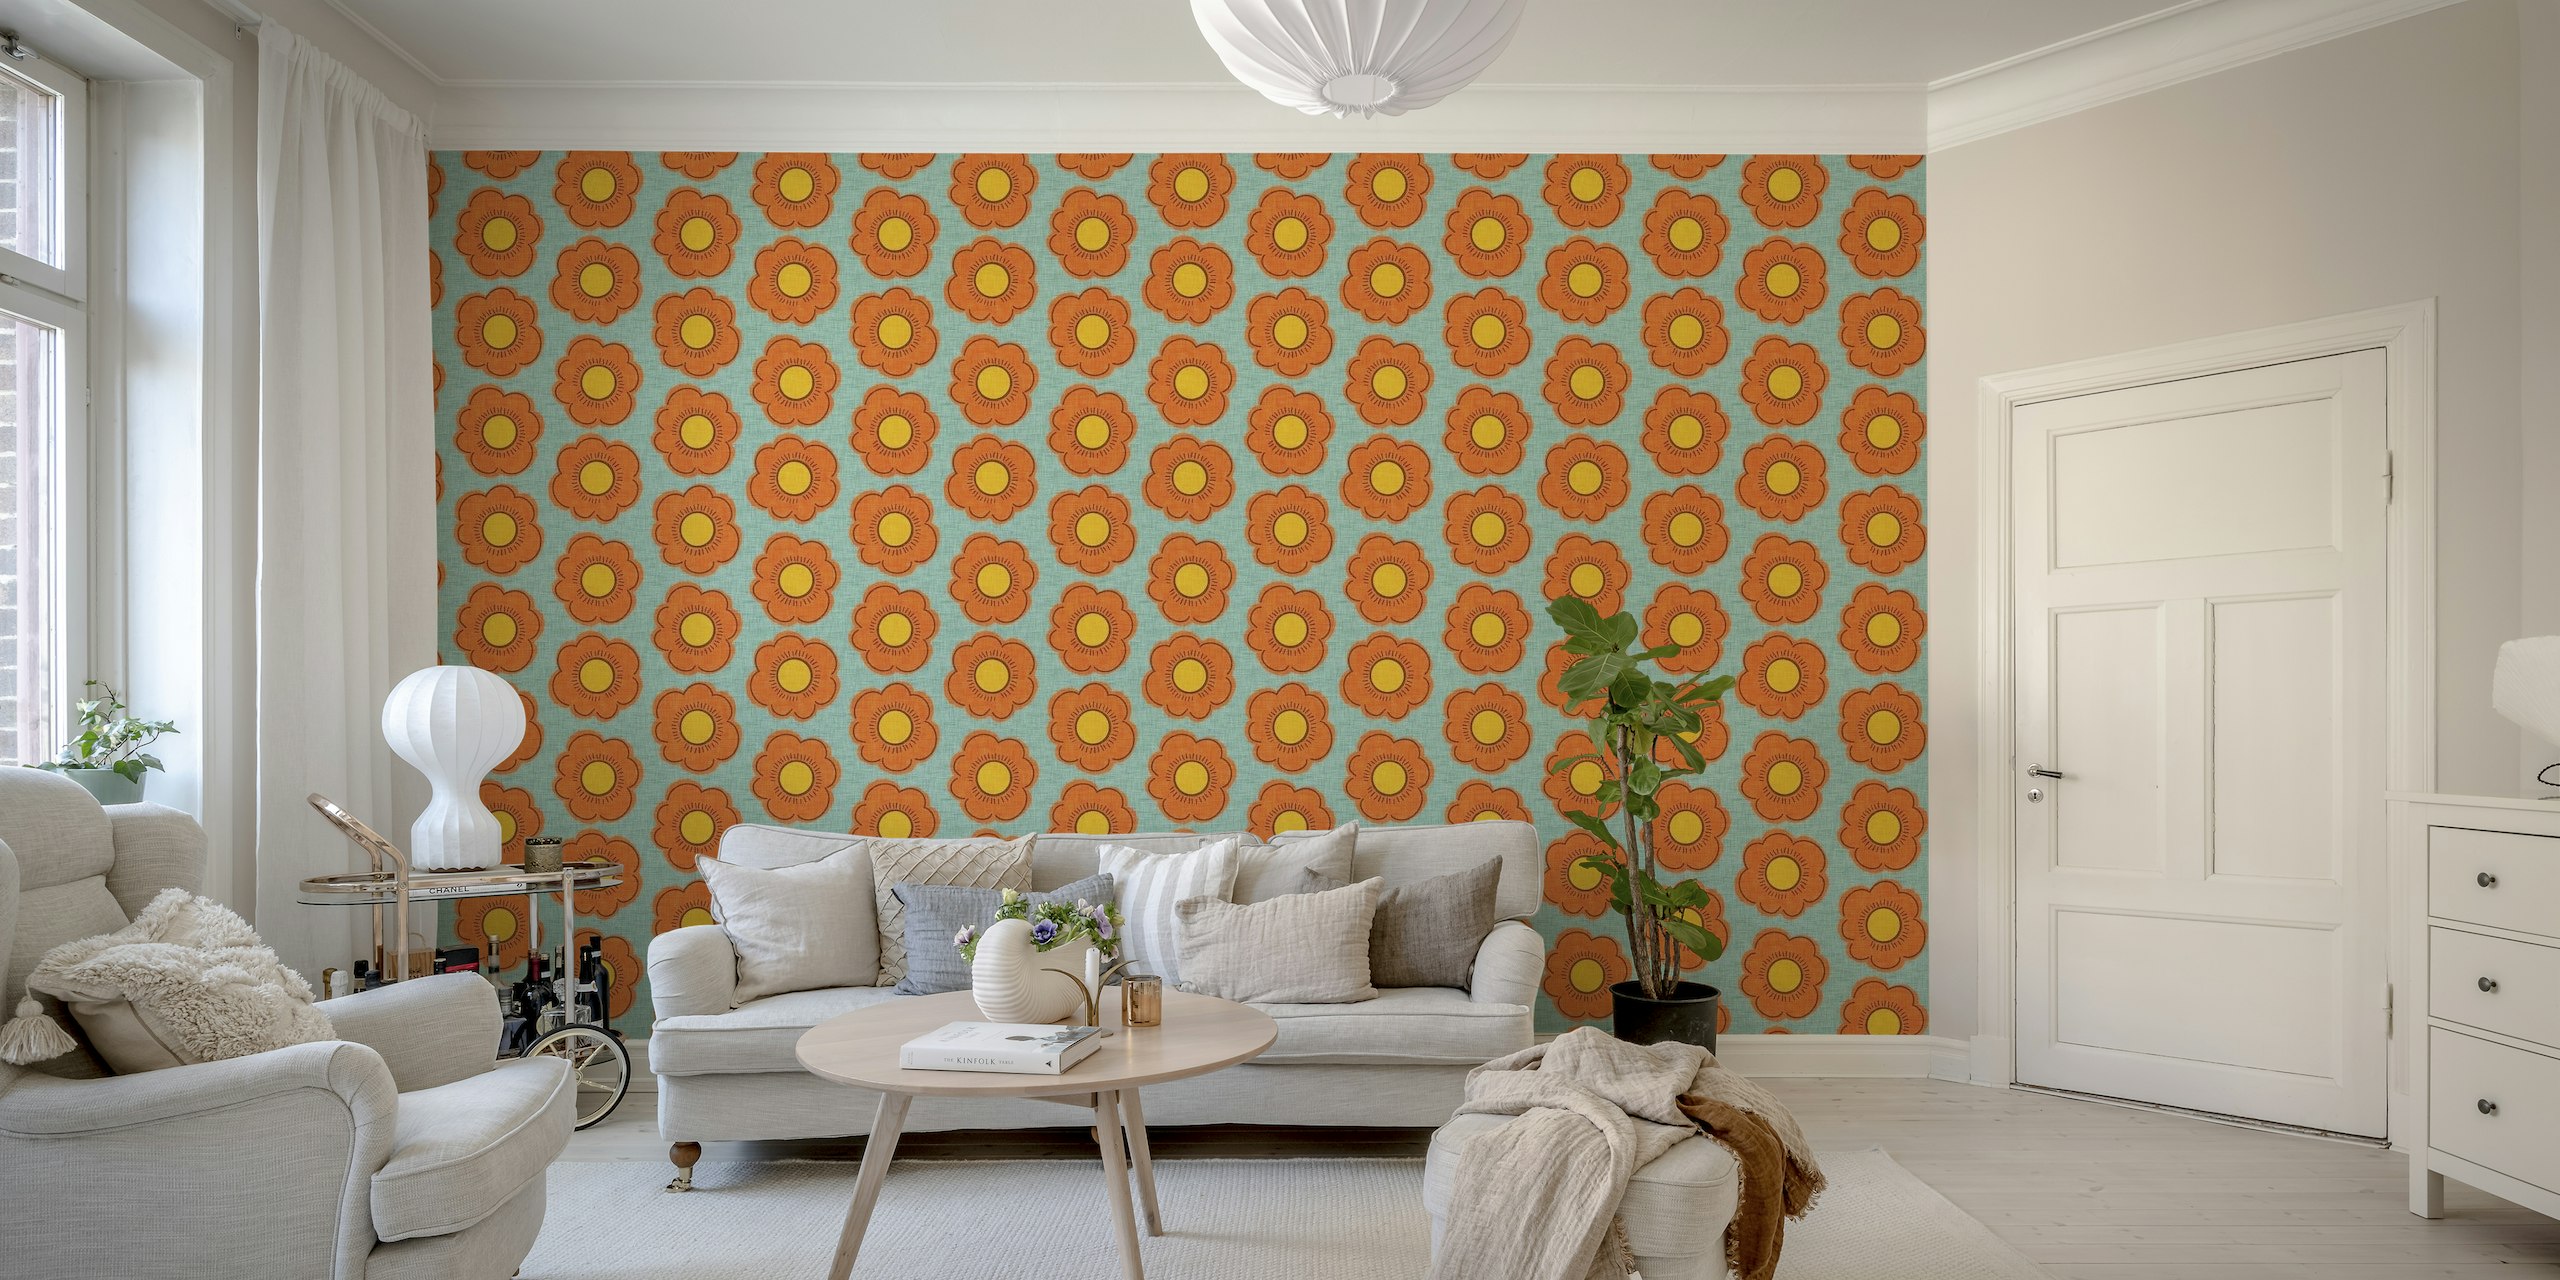 Retro-inspired '70s Flower Blue- Mid-century Floral' wall mural with orange flowers on a blue background.